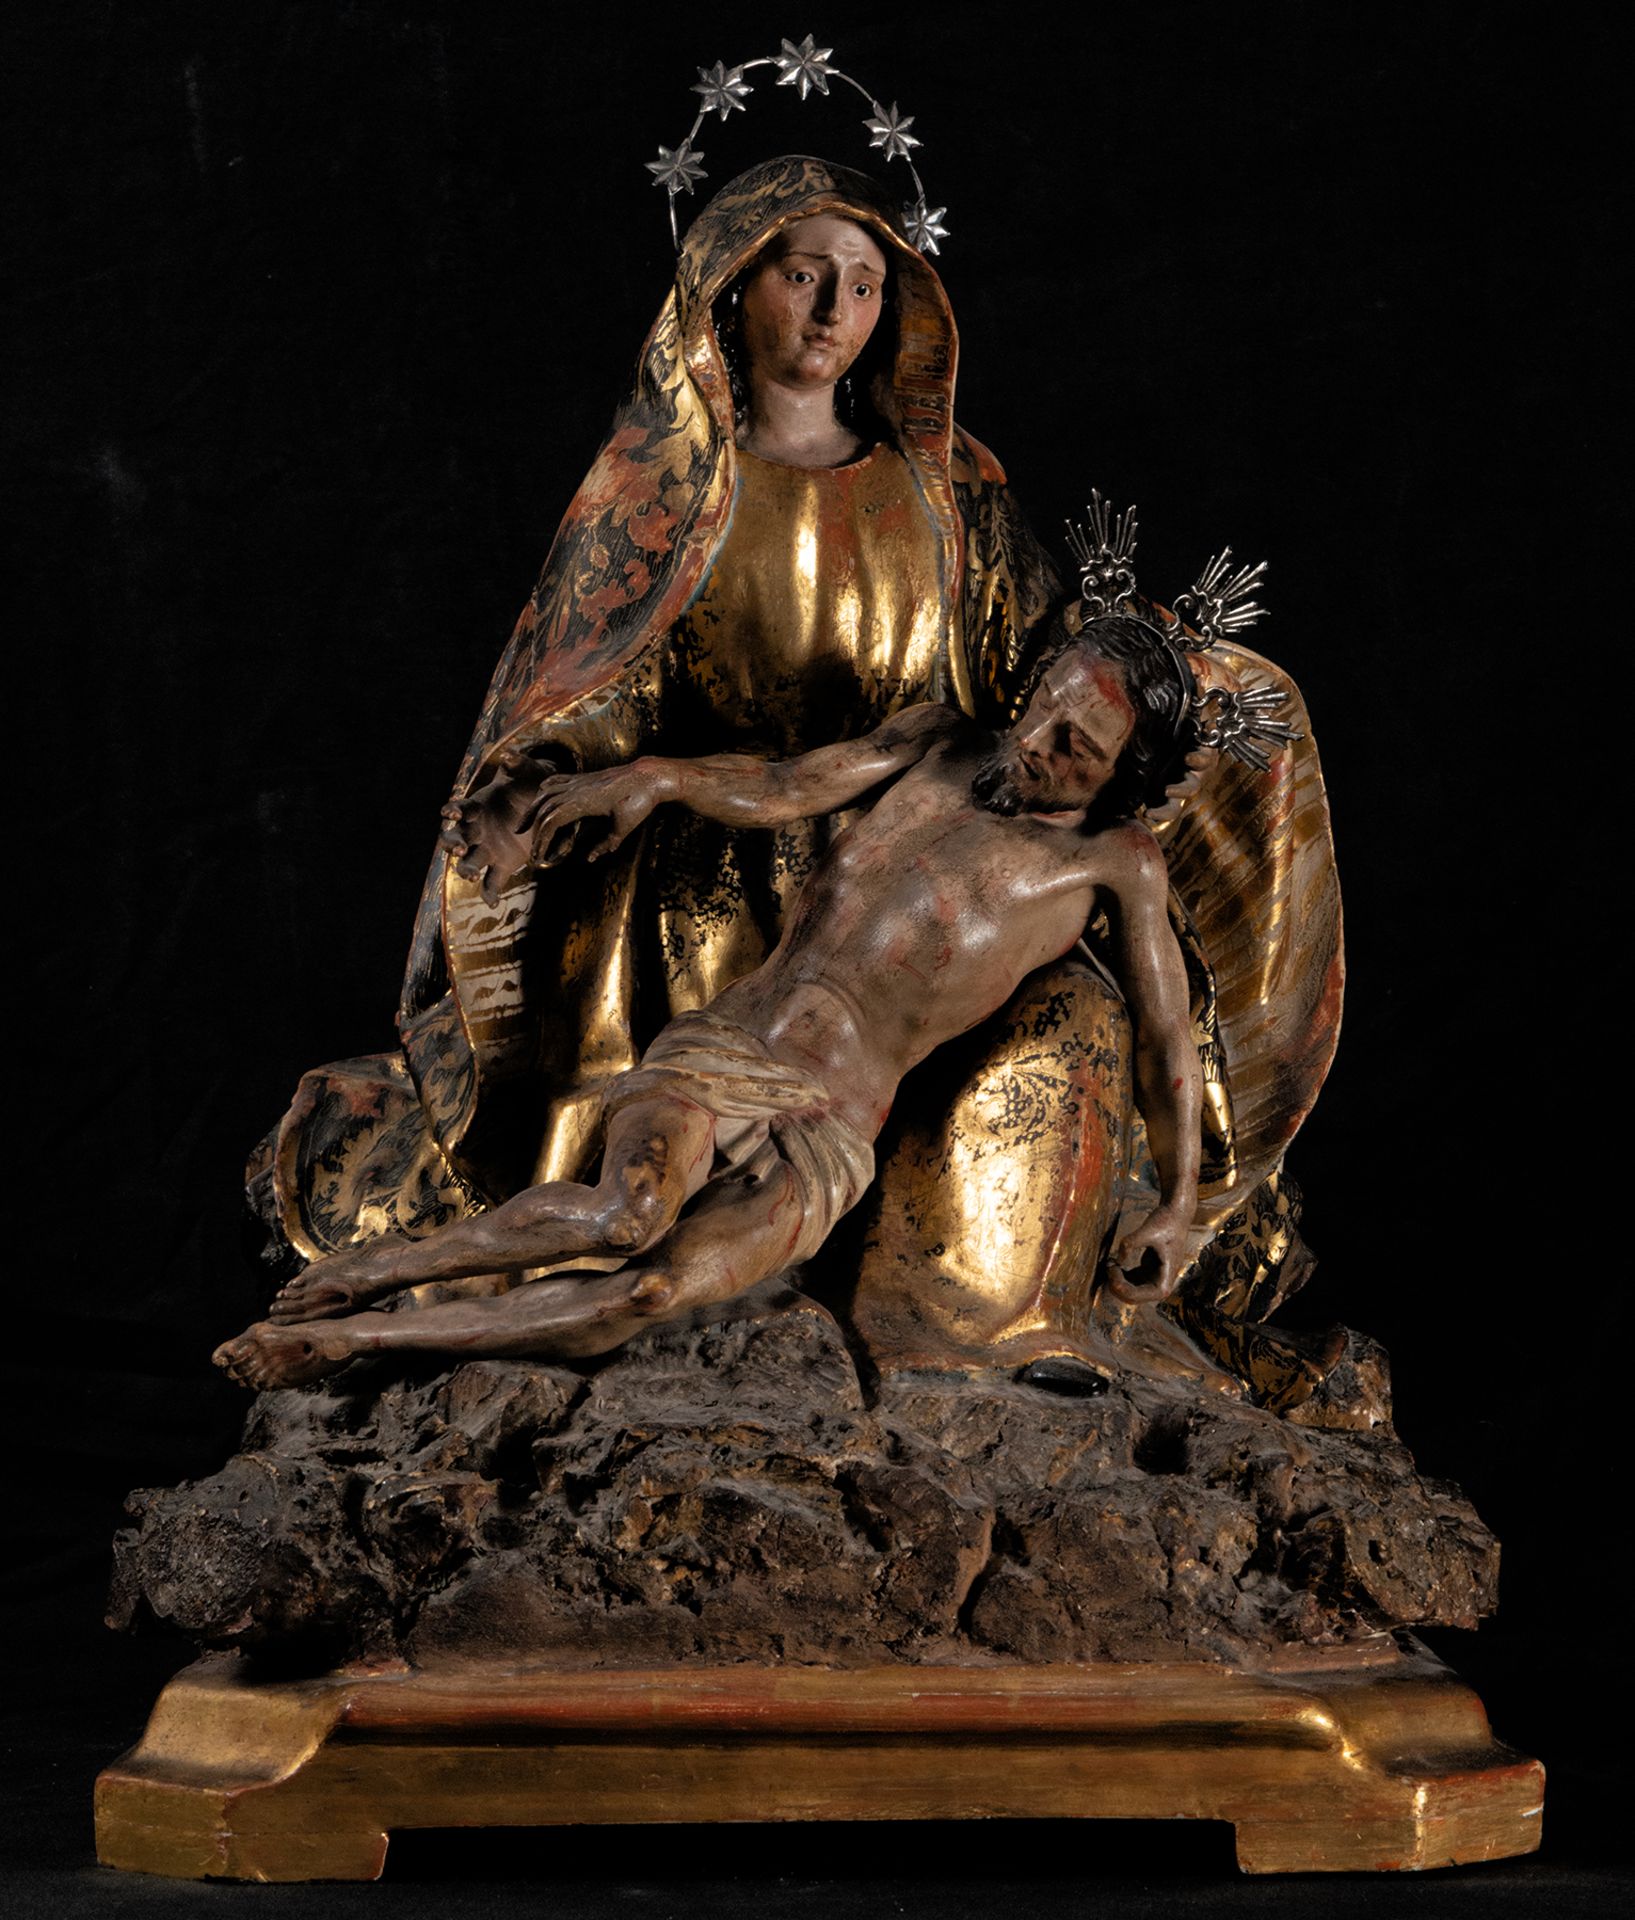 Exceptional Pieta depicting Mary with Christ in her arms, Guatemala, early 18th century Novohisopano